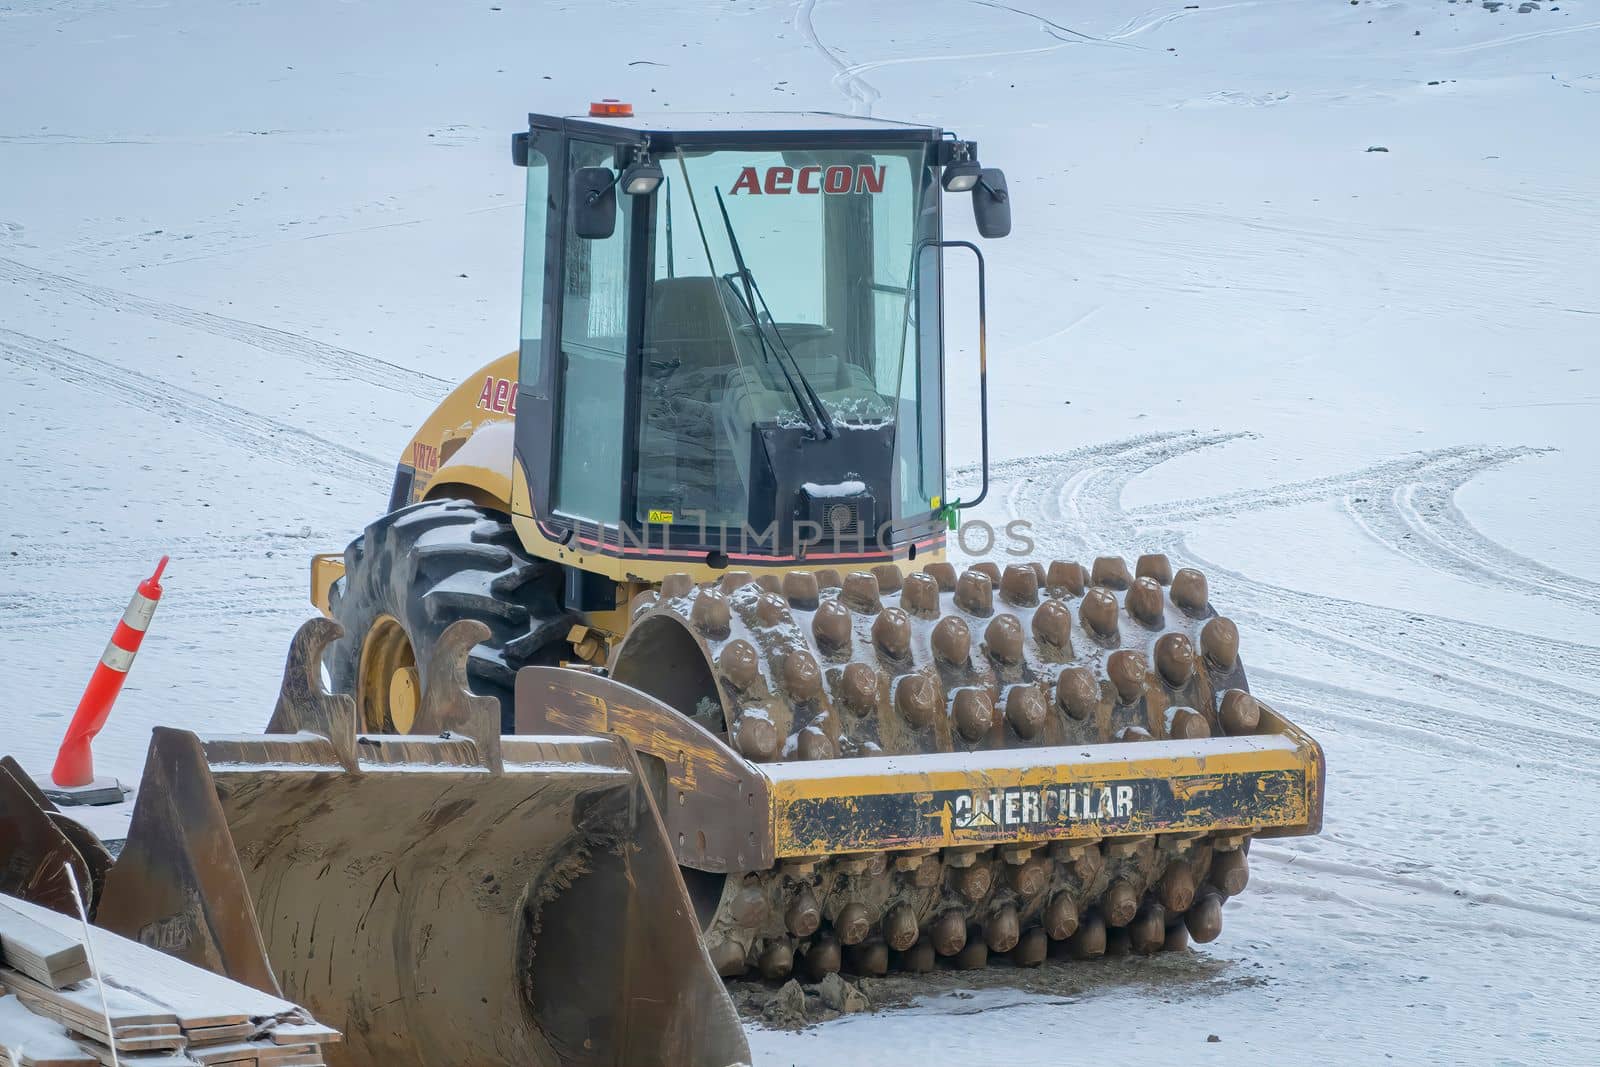 Calgary, Alberta, Canada. Dec 31, 2022. A Drum Vibrating Roller Compactor Construction Machine. A Vibratory Soil Compactor during winter. by oasisamuel